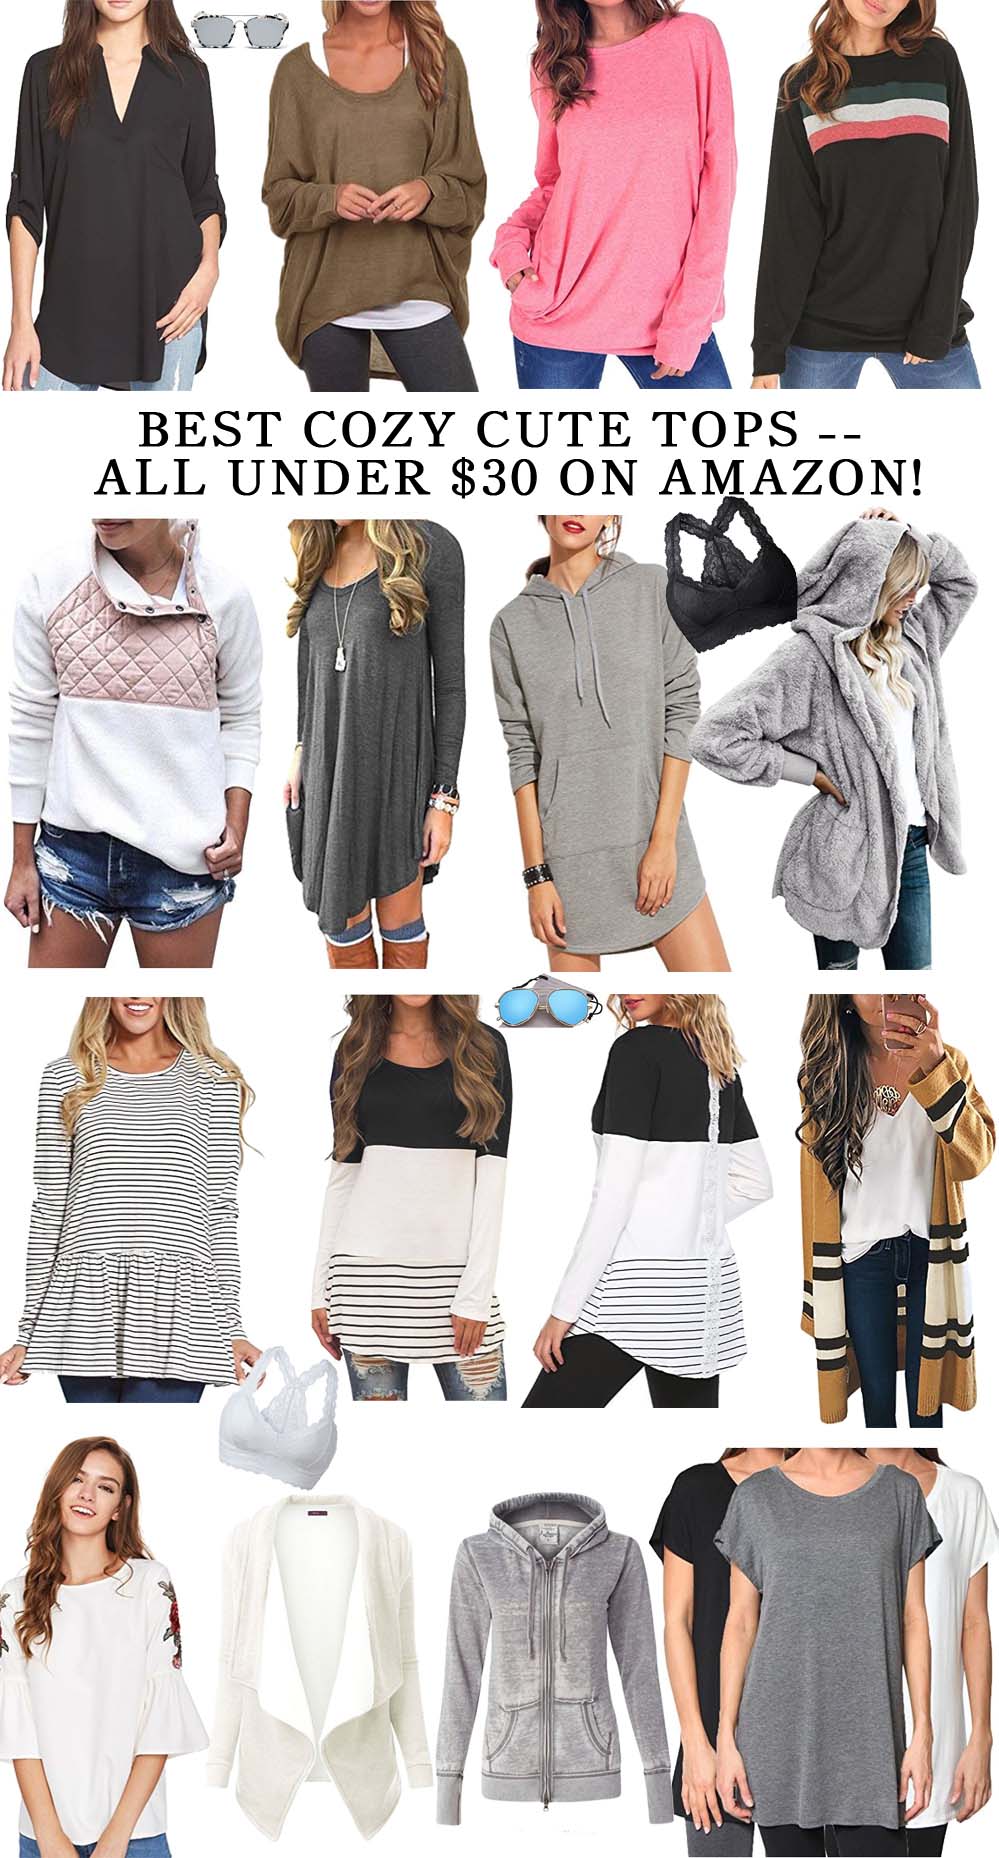 The Cutest, Coziest Tops -- under $30 on Amazon! // the modern savvy - 16 really cute tops by popular Florida style blogger The Modern Savvy